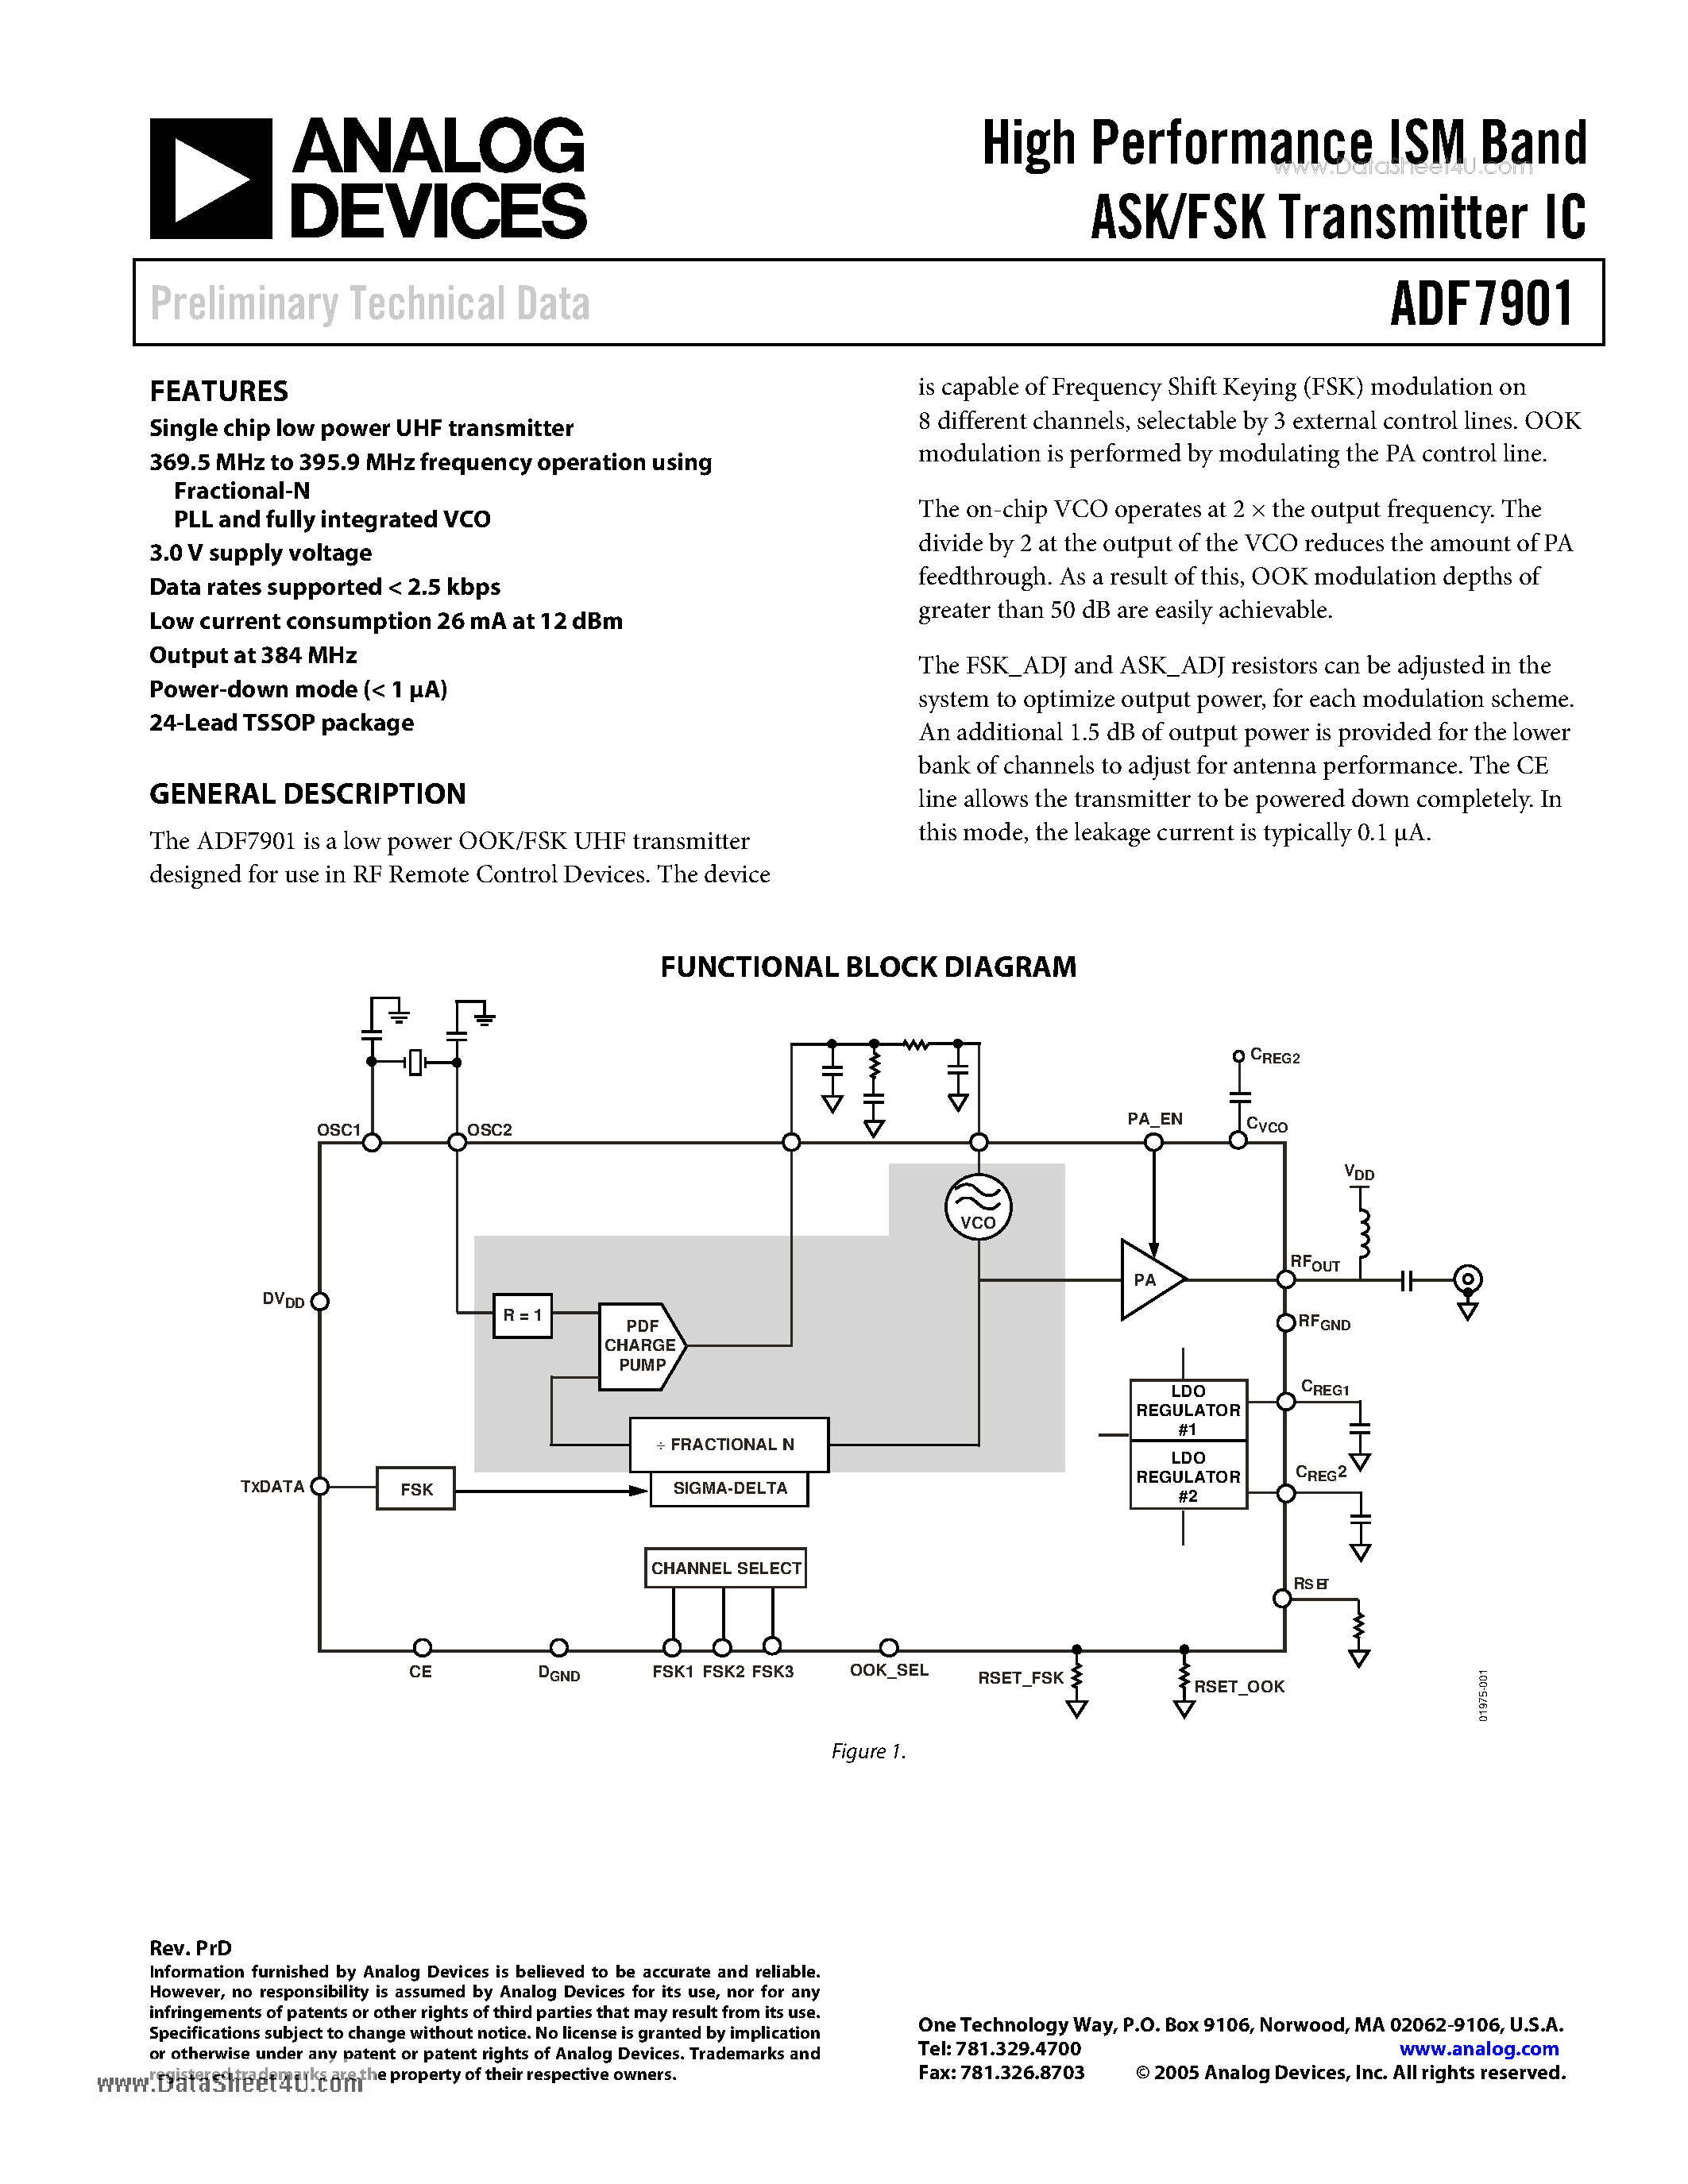 Datasheet ADF7901 - High Performance ISM Band ASK/FSK Transmitter IC page 1